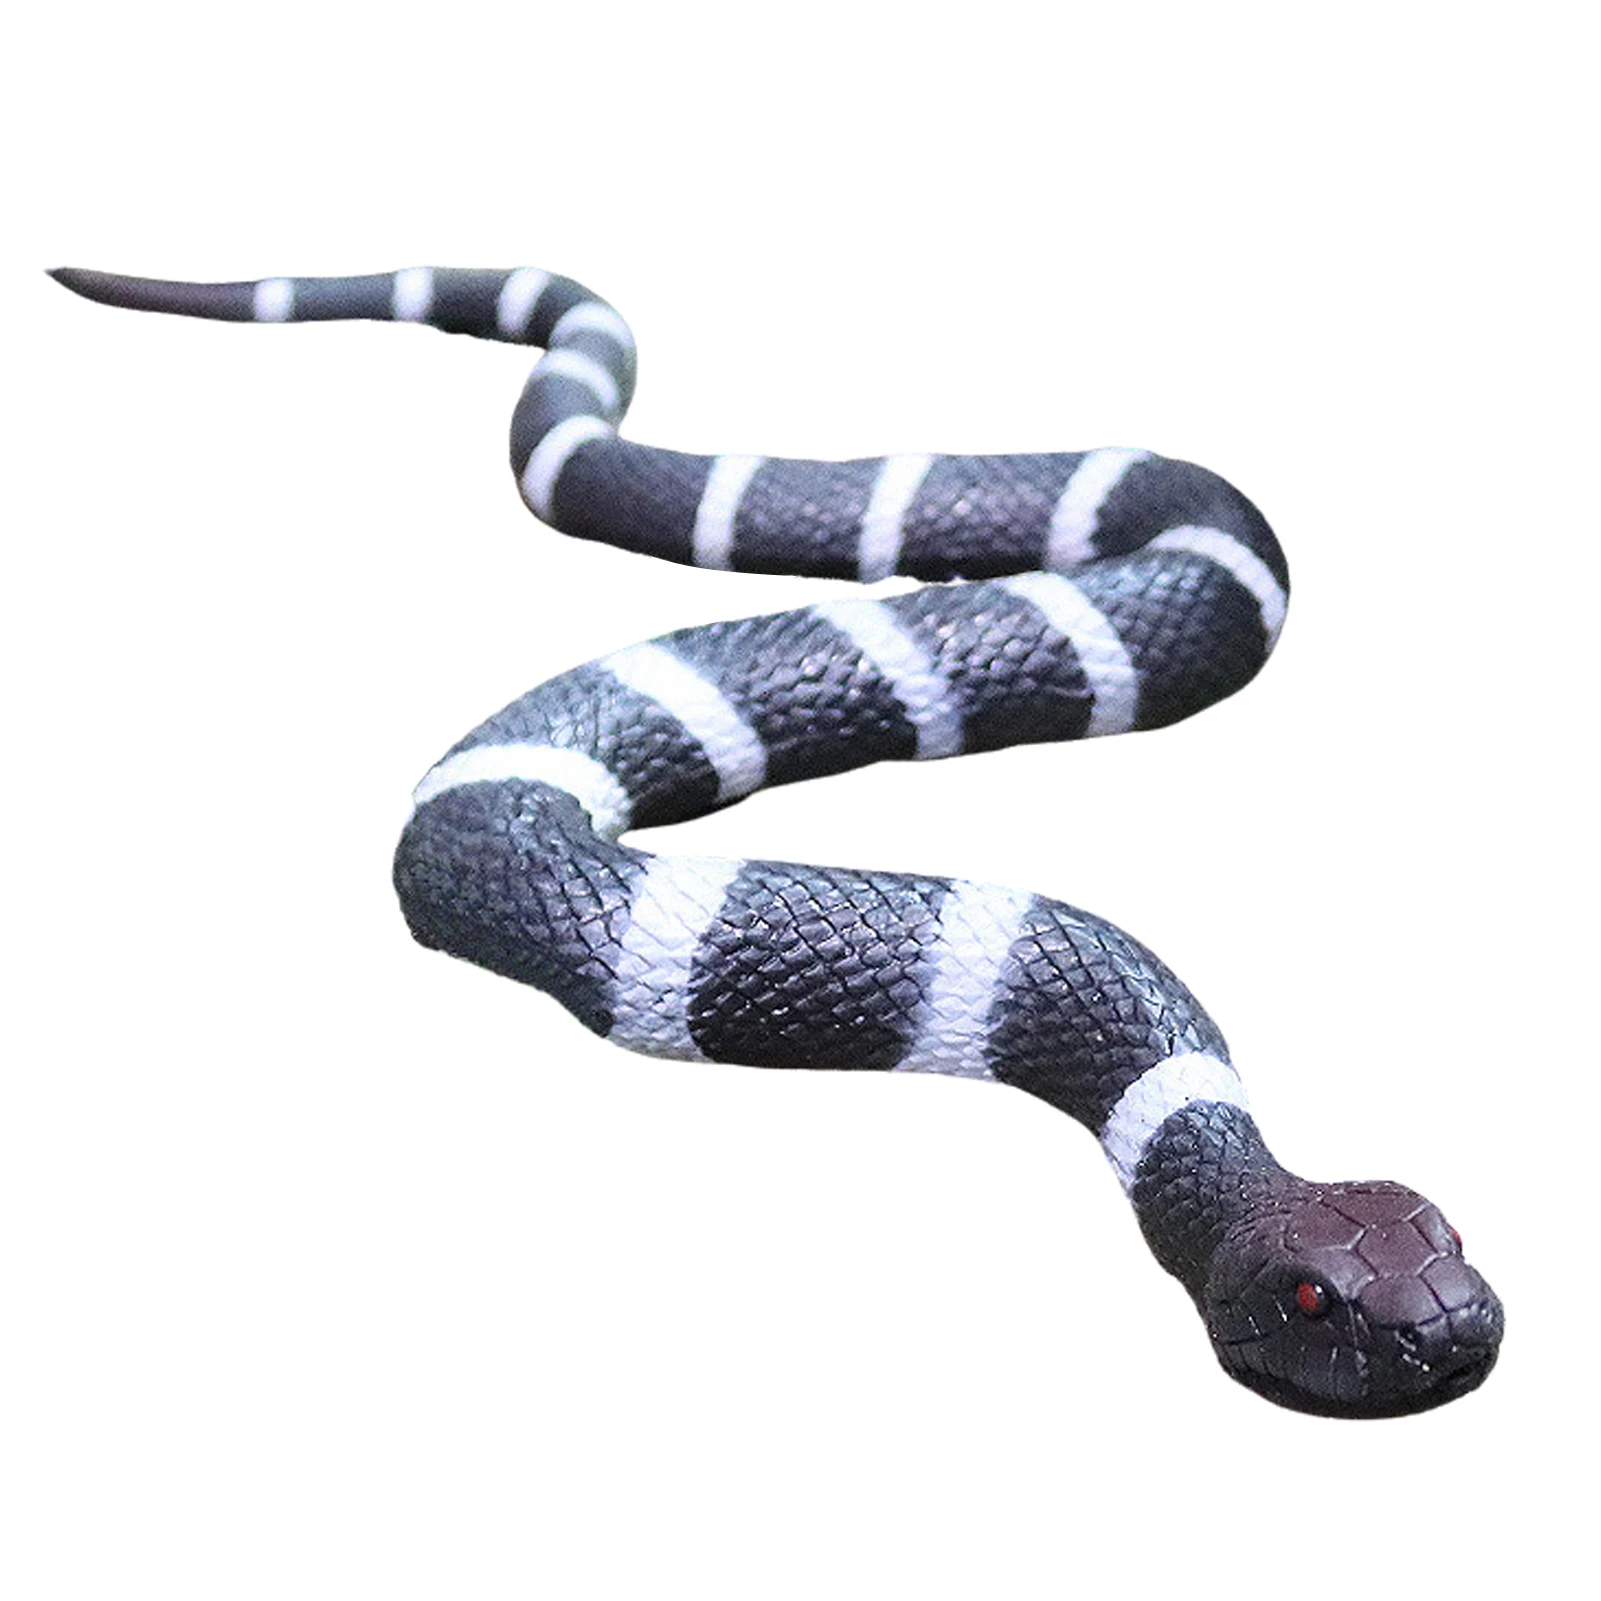 Details about   Palstic Snakes Realistic Fake Snake Toys for Garden Props to Scare Birds, 